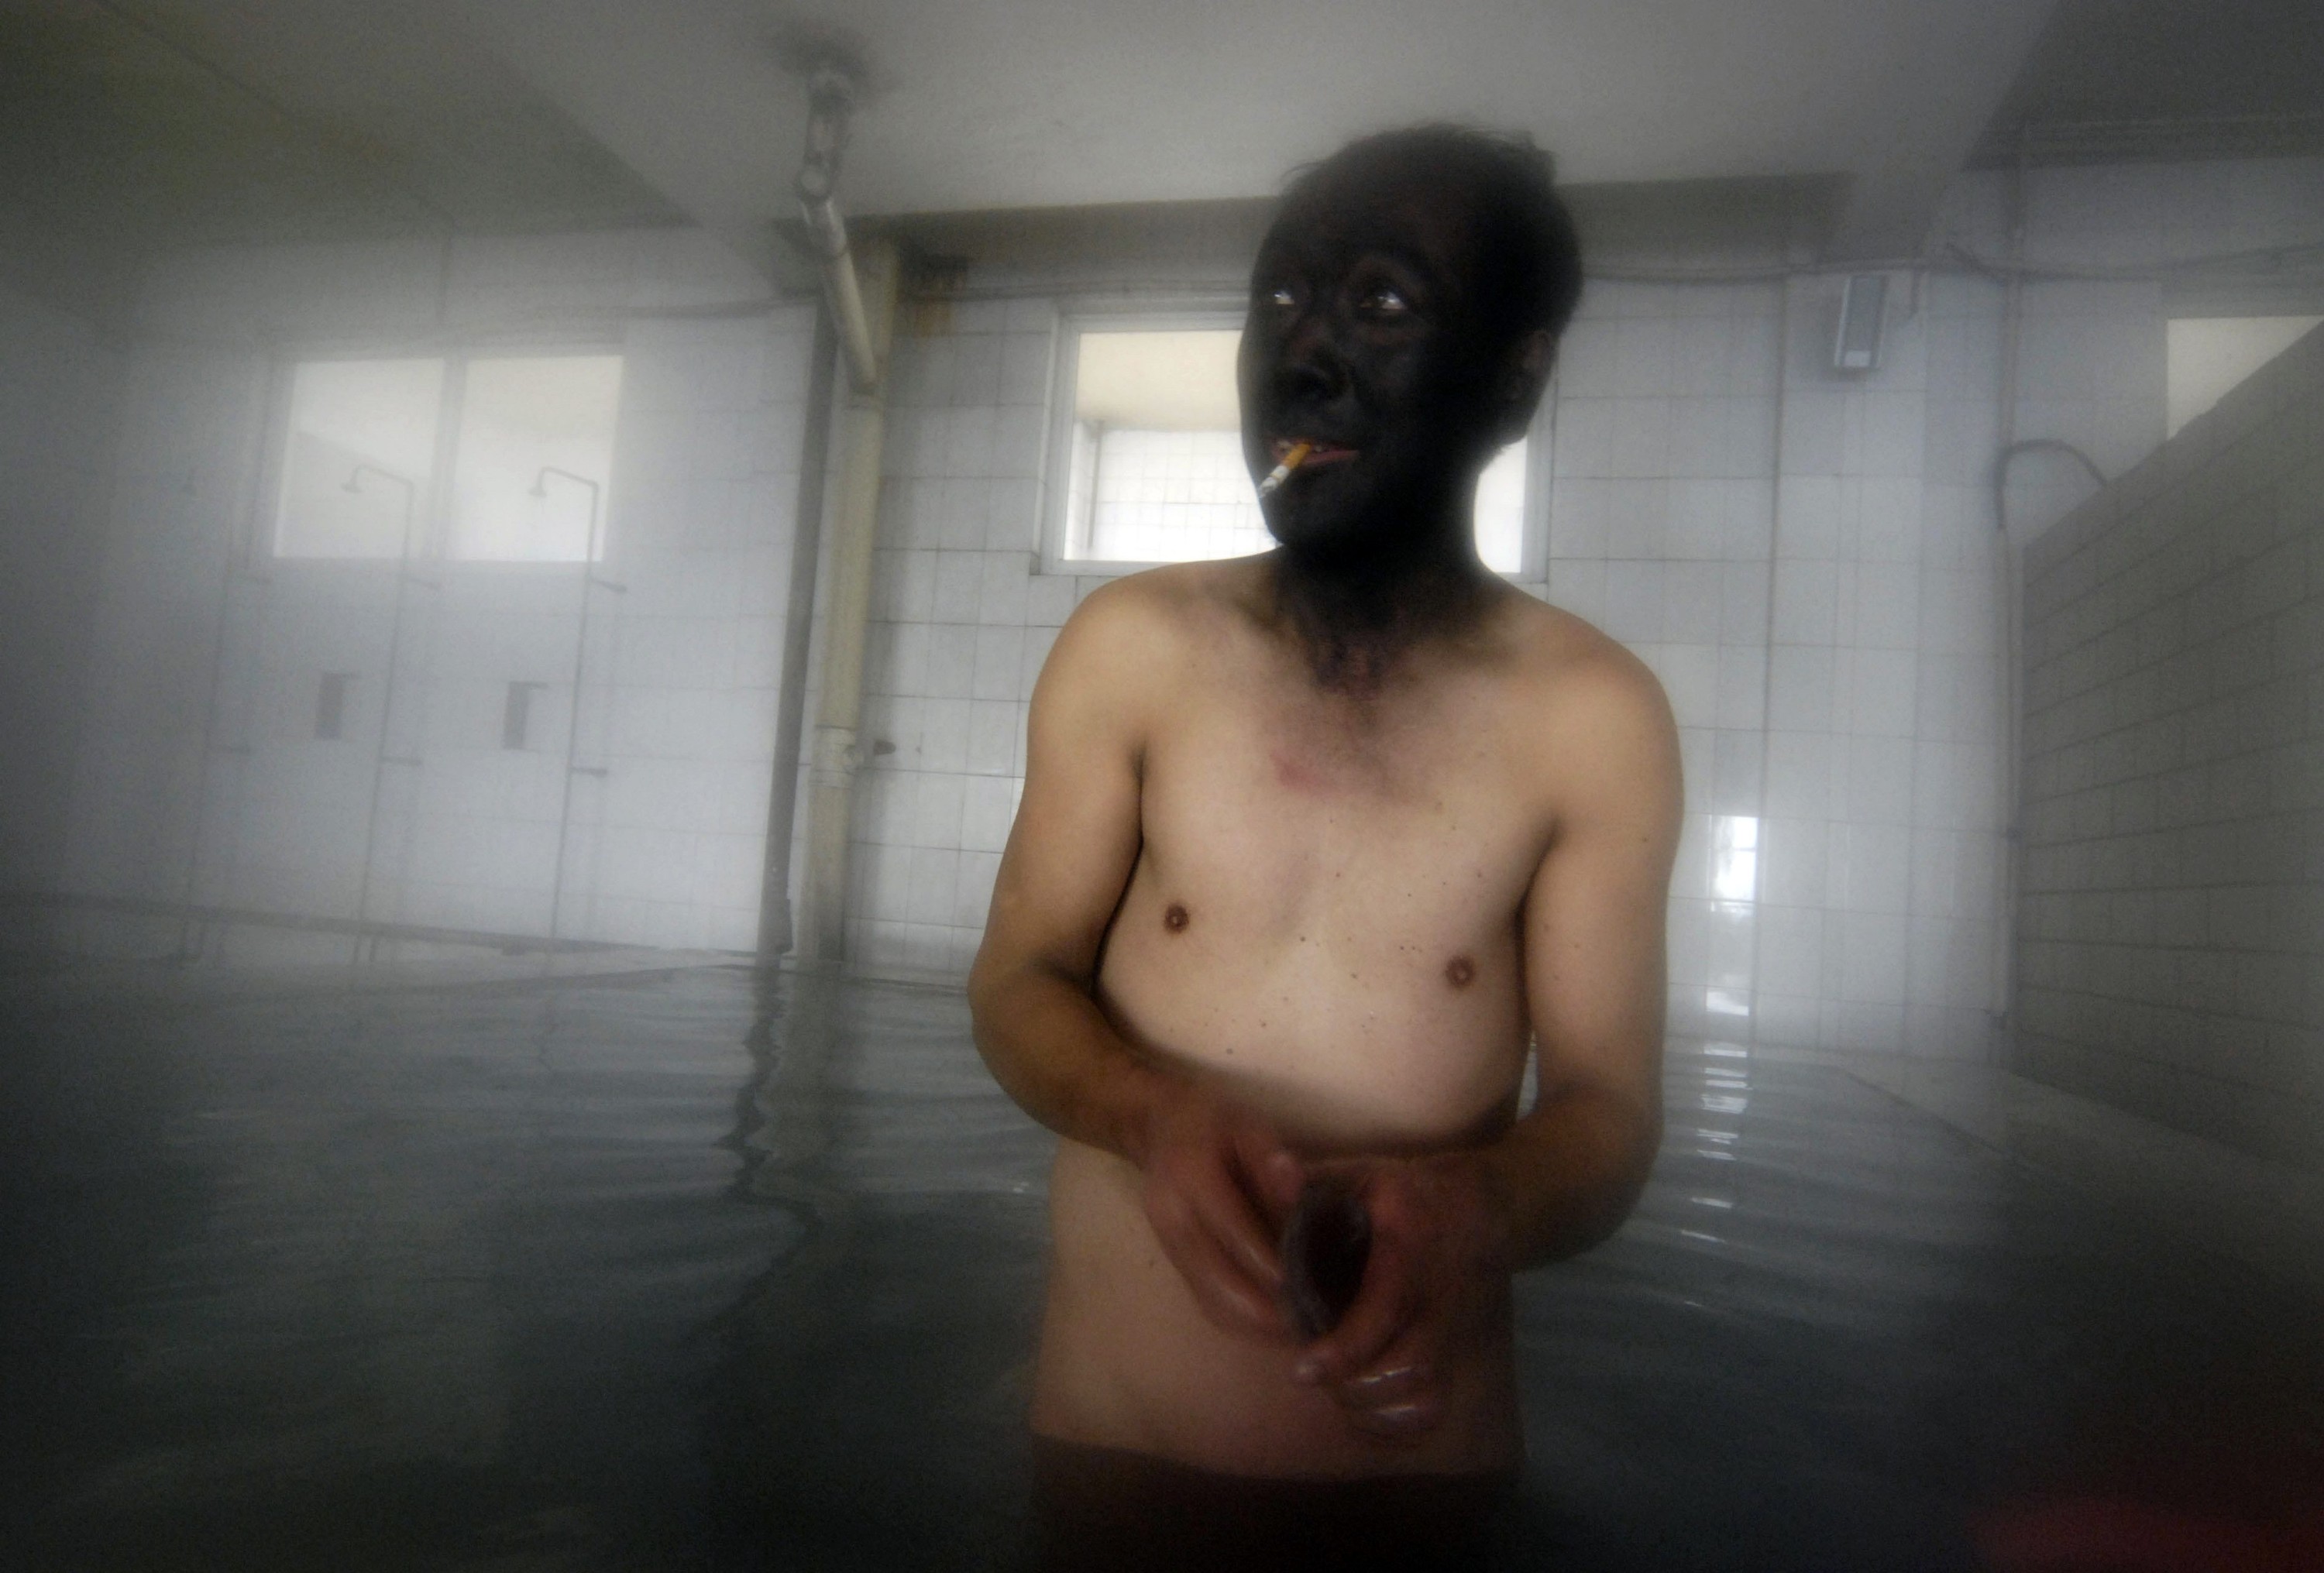 A coal miner takes a bath after his shift at a mine in Changzhi, China.